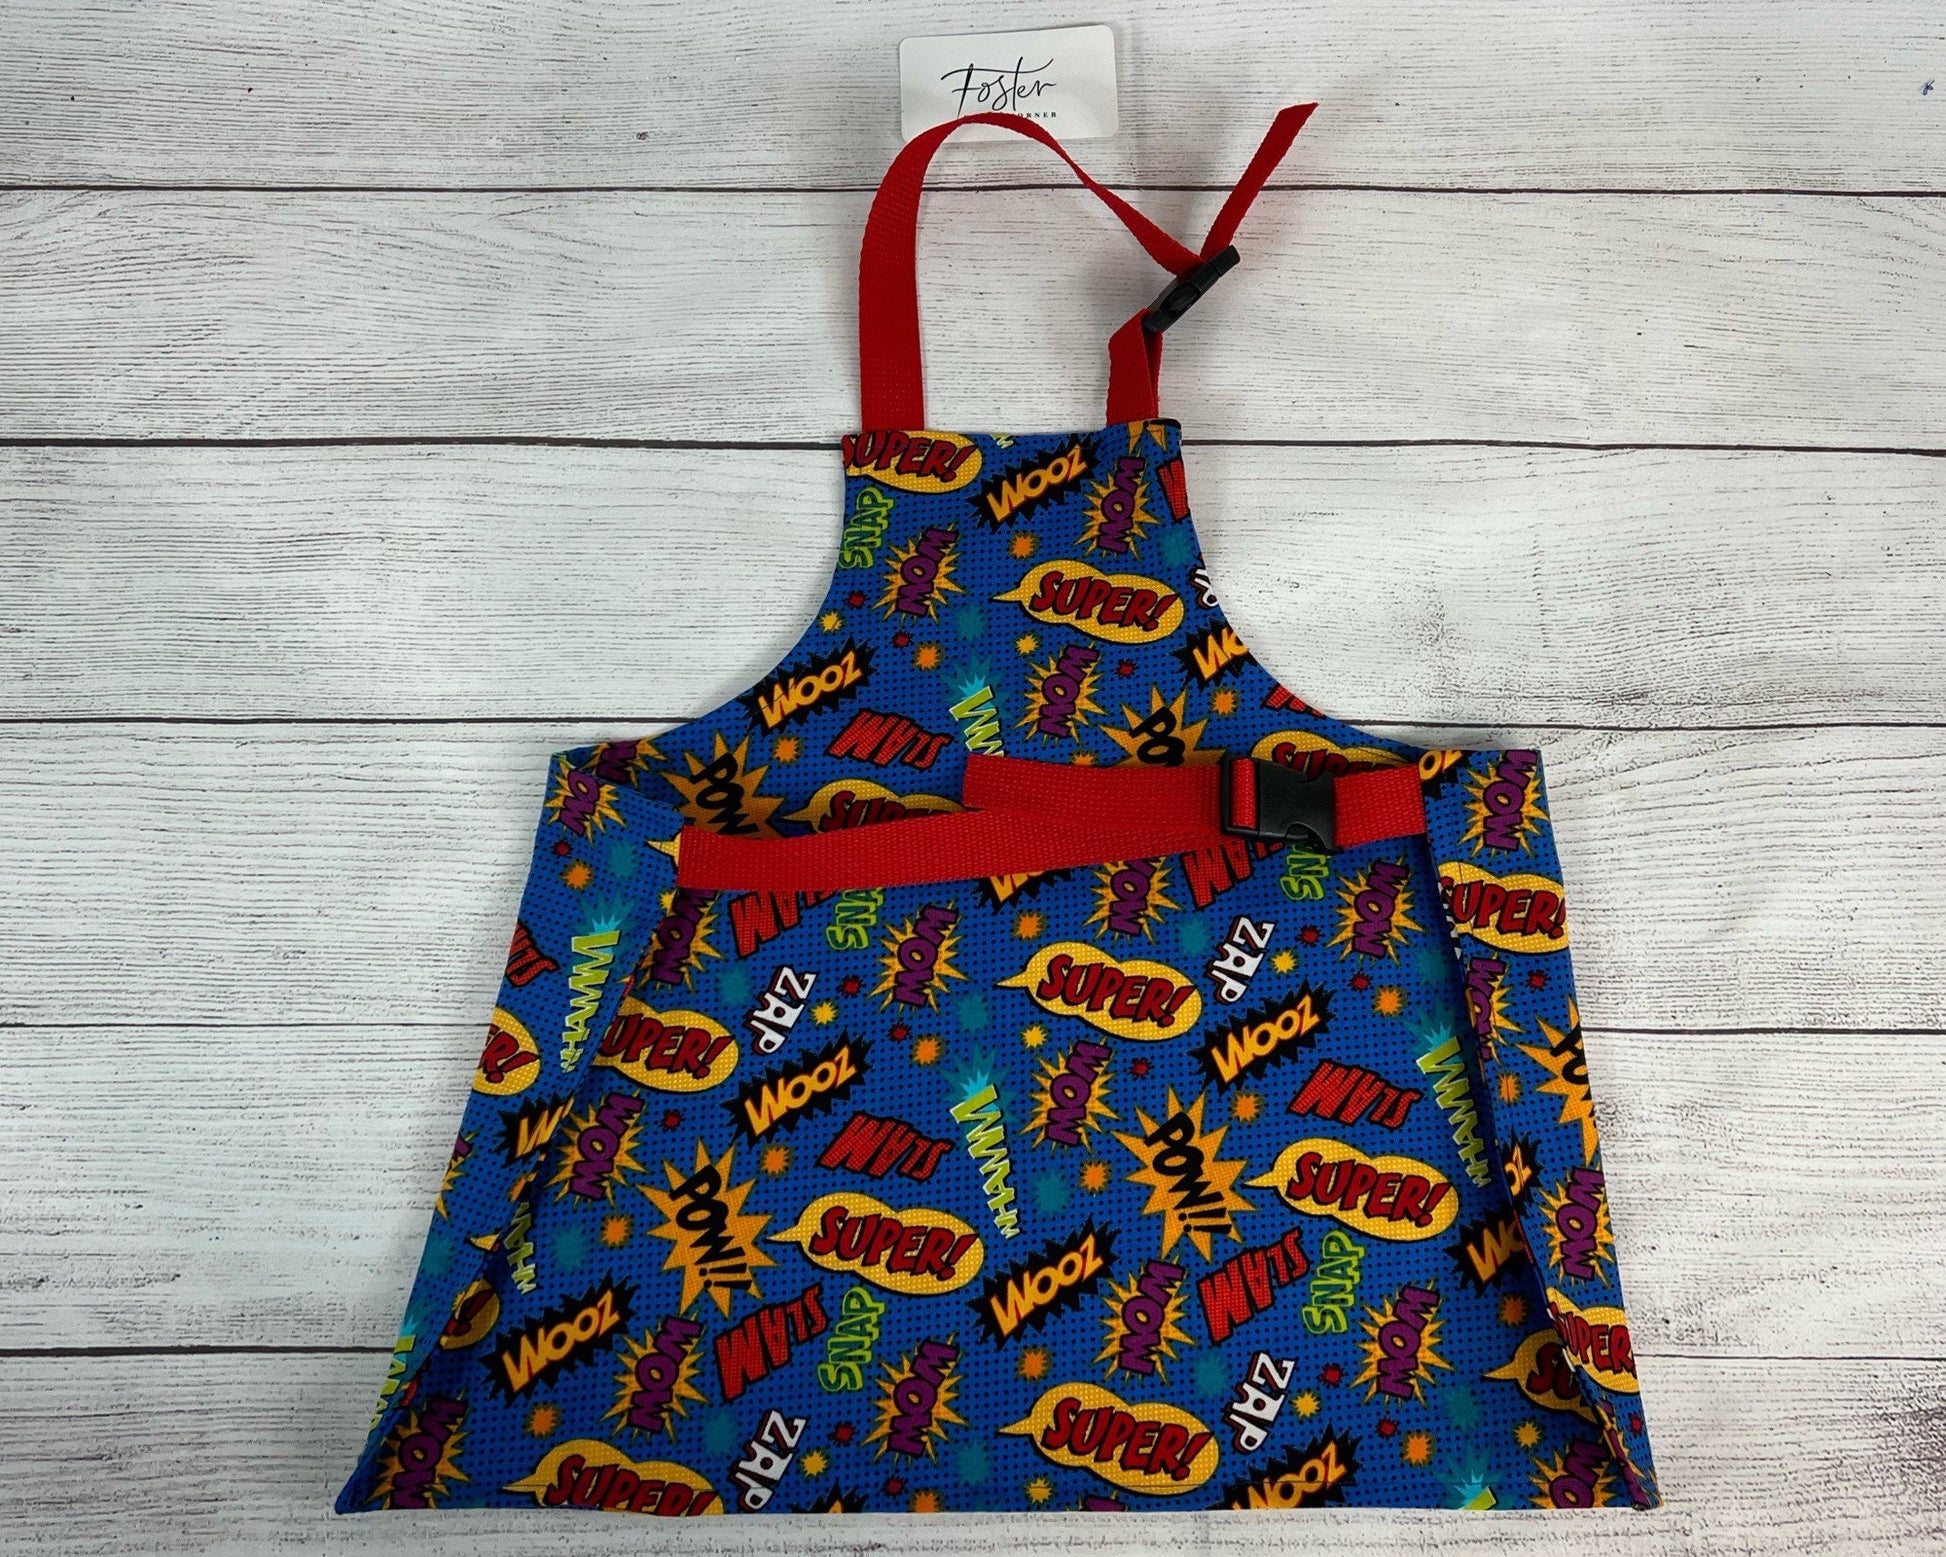 Toddler Apron - Kitchen - Cooking - Early Cooking Skills - Toddler Messes - Toddler Accessories - Super Hero - Heroes - Pow - Small Apron